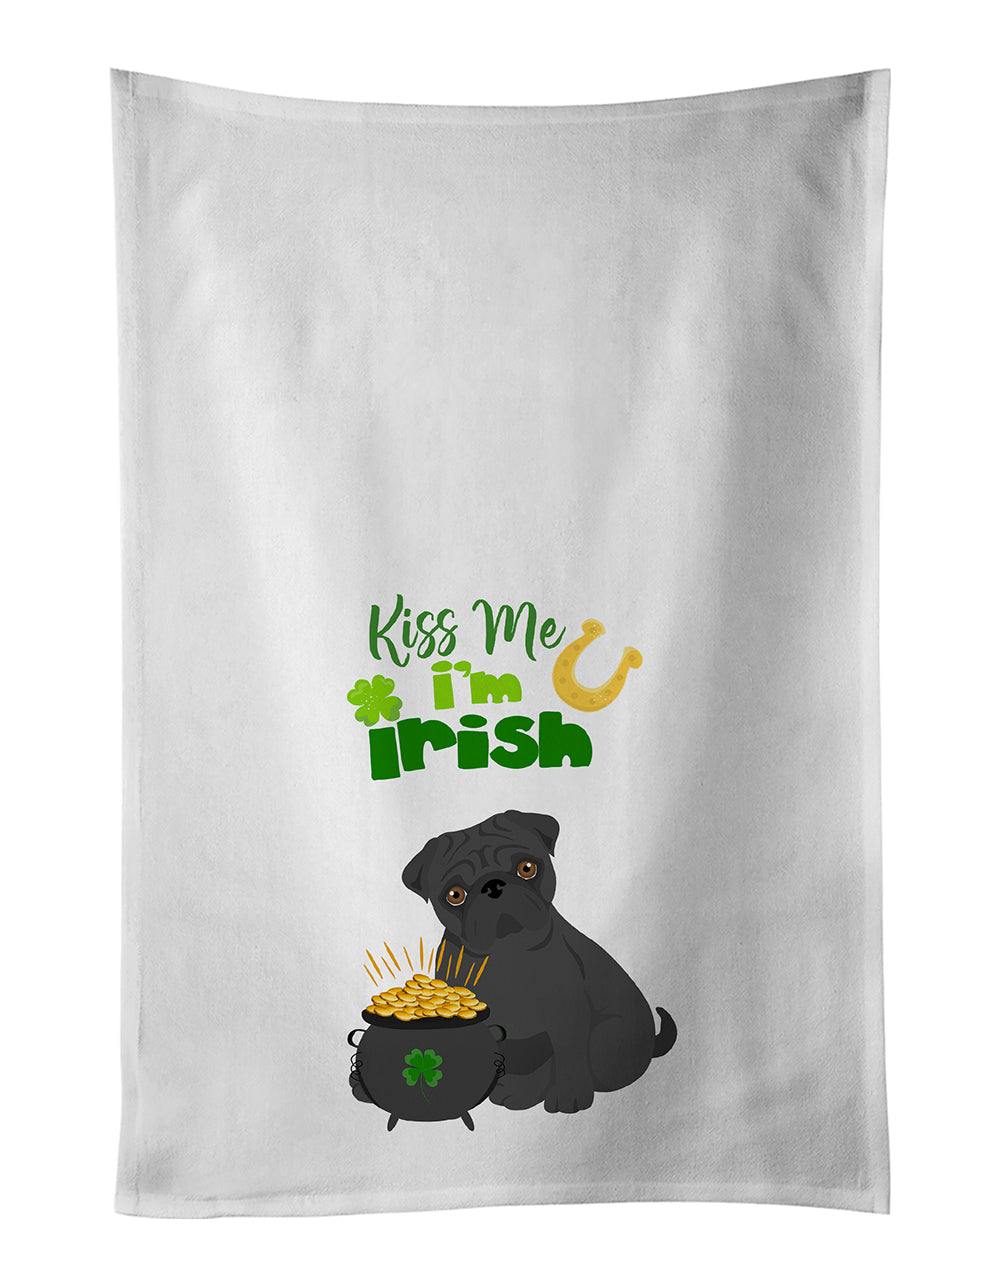 Buy this Black Pug St. Patrick's Day White Kitchen Towel Set of 2 Dish Towels